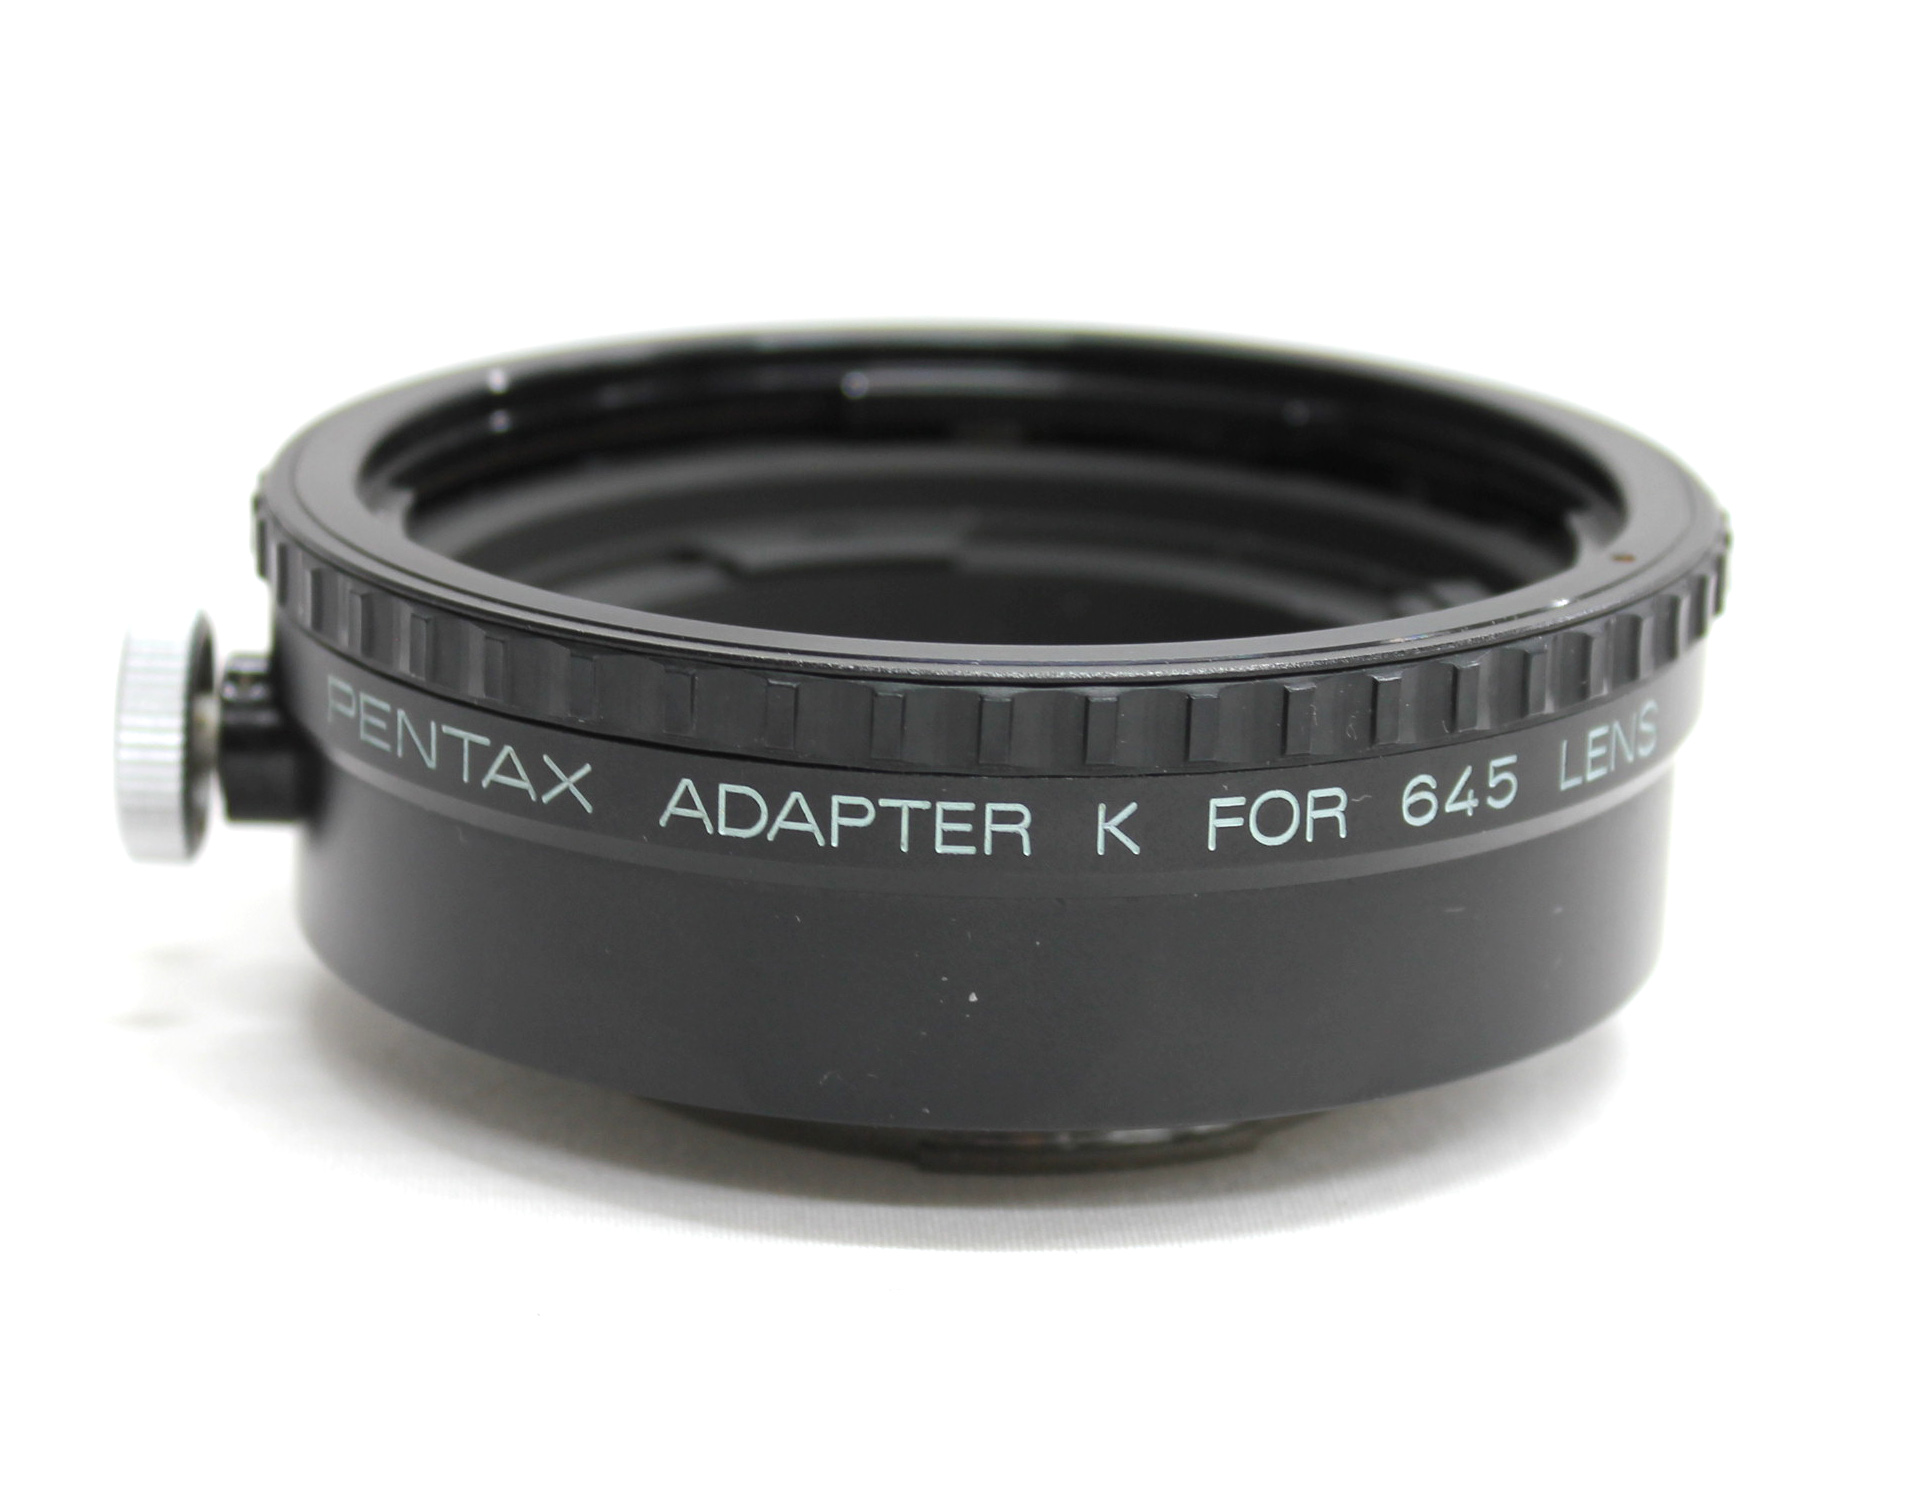 [Excellent+++++] Pentax Adapter K for Pentax 645 Lens from Japan